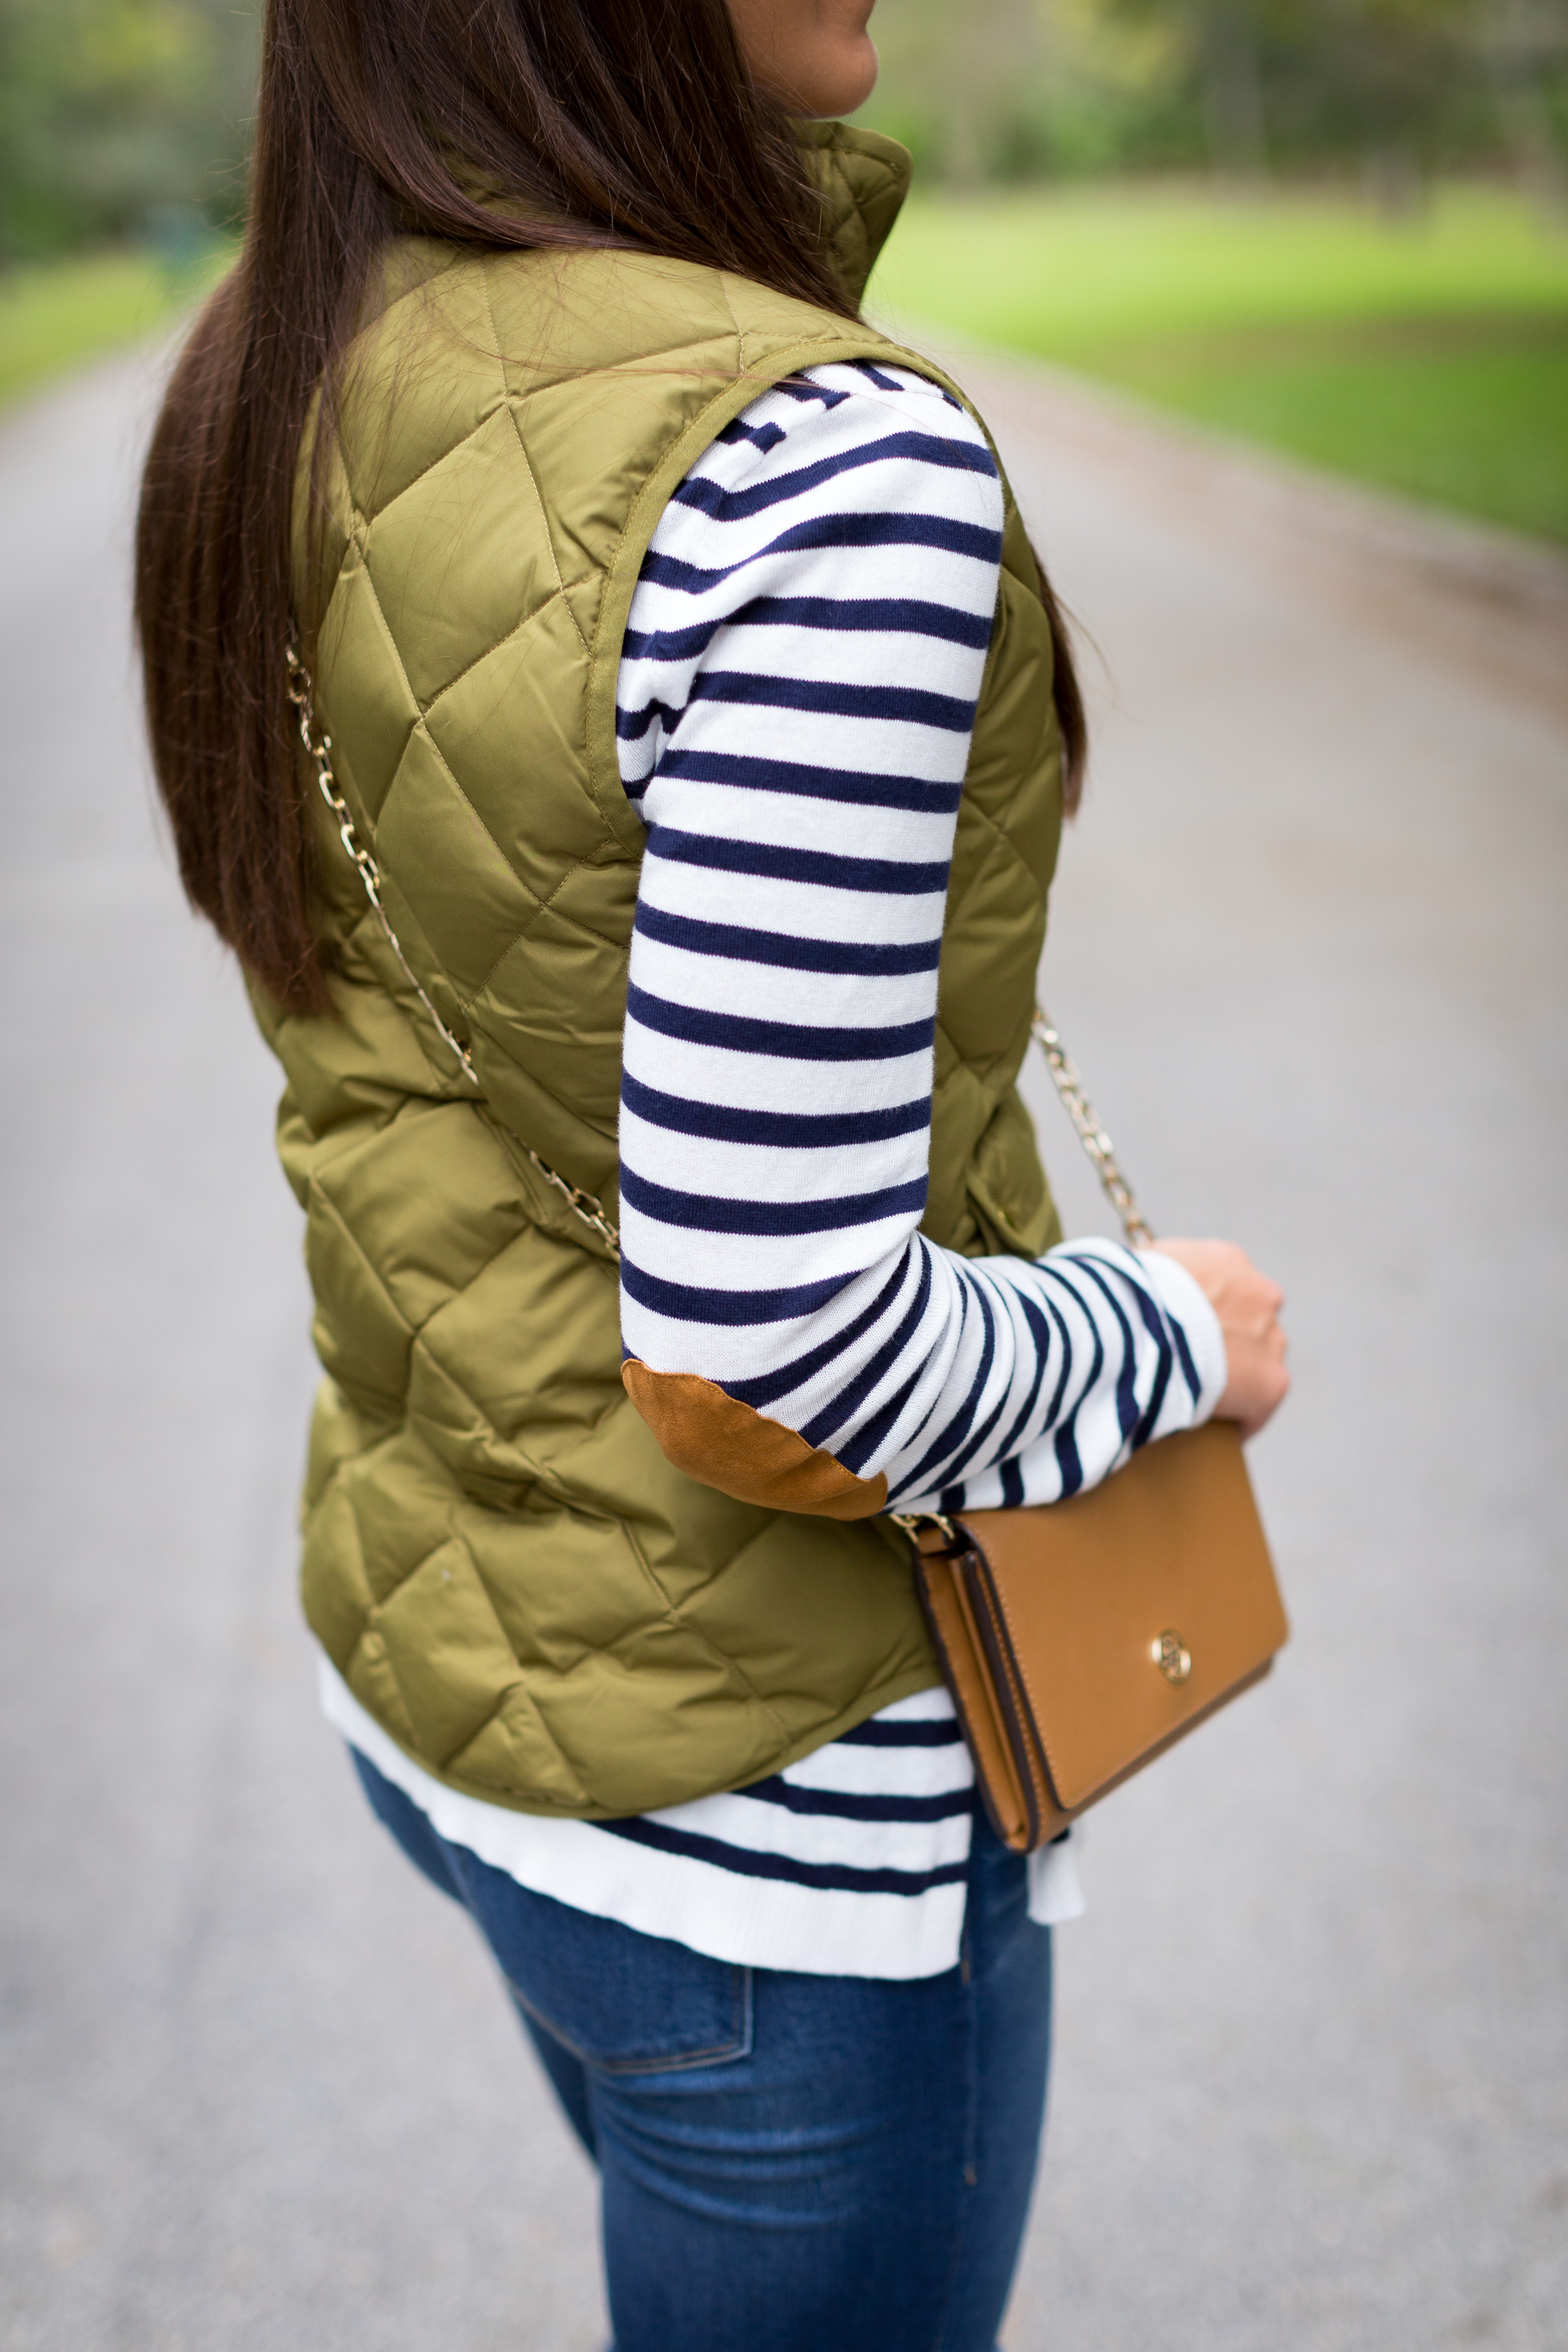 quilted vest, j.crew excursion vest, navy stripe tee, extra large acrylic monogram necklace, ivory excursion vest, ivory puffer vest, fall style, fall fashion, fall style inspiration, a southern drawl fall outfits, cute fall outfits, preppy fall outfits, southern fashion blogger // grace wainwright a southern drawl